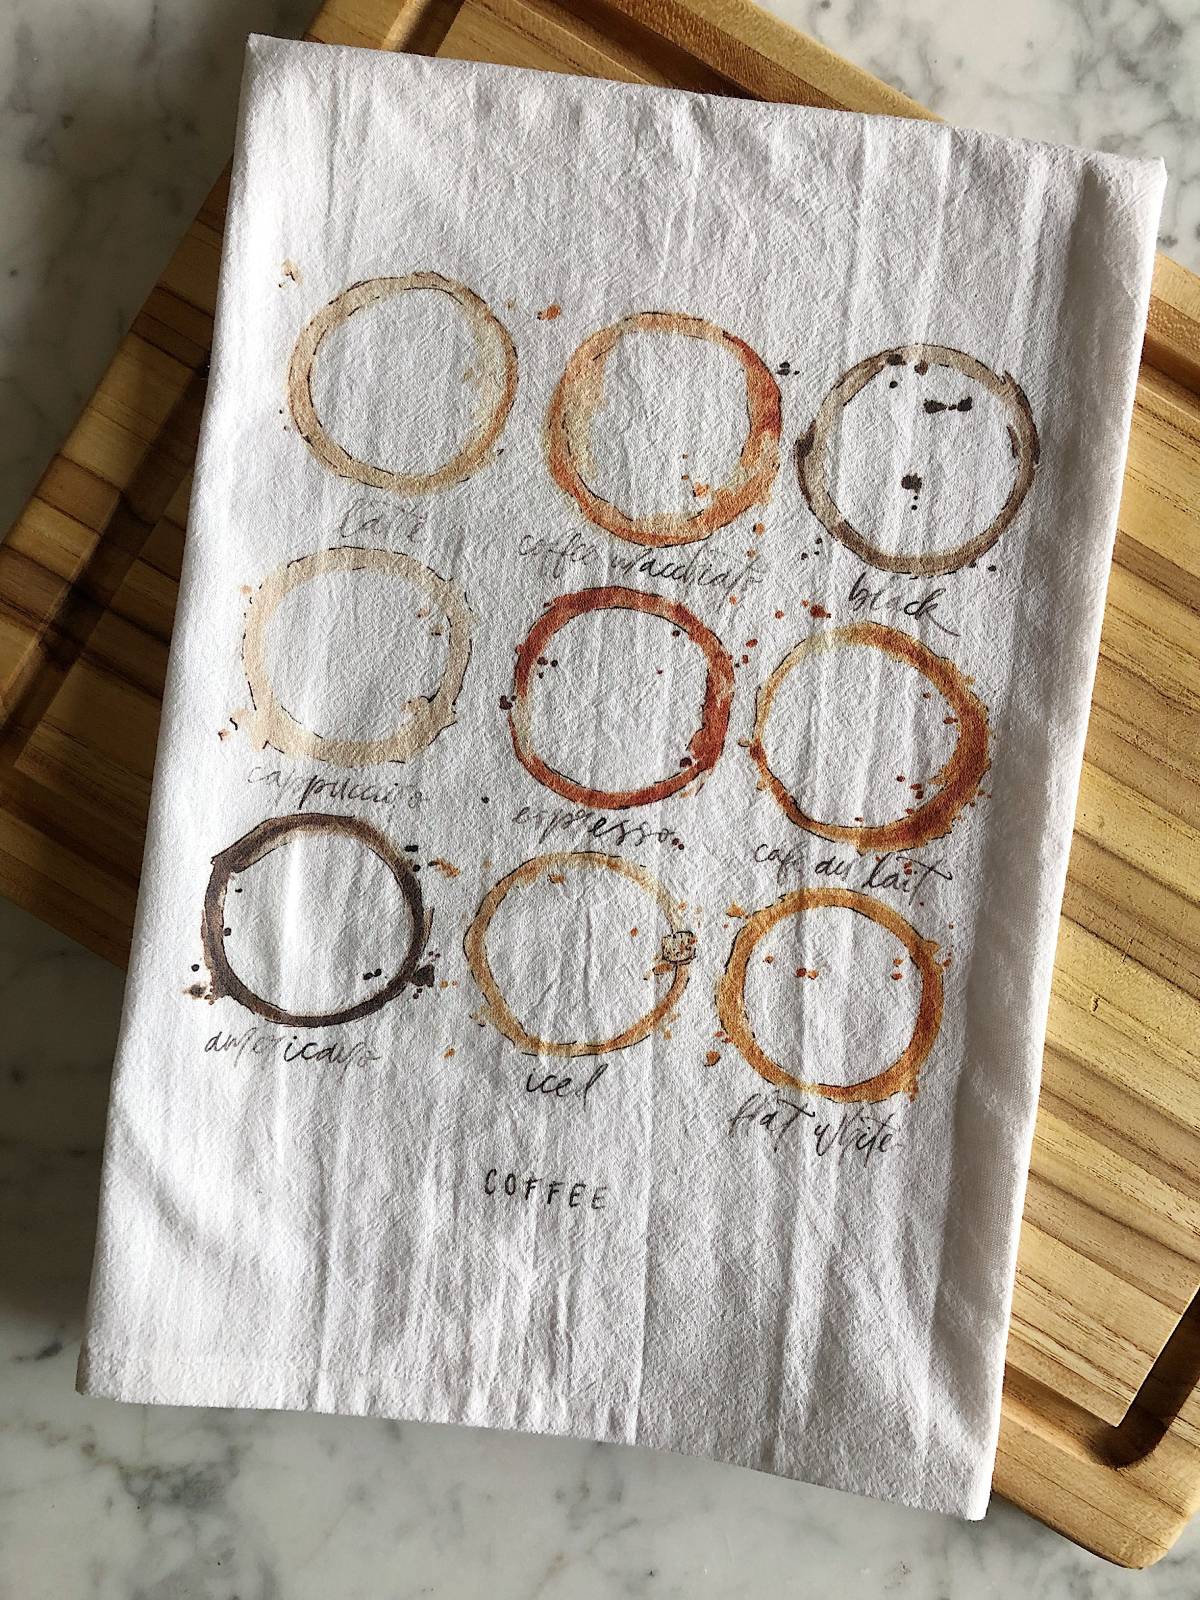 A white tea towel displaying watercolor illustrations of 9 different types of coffees as coffee ring stains